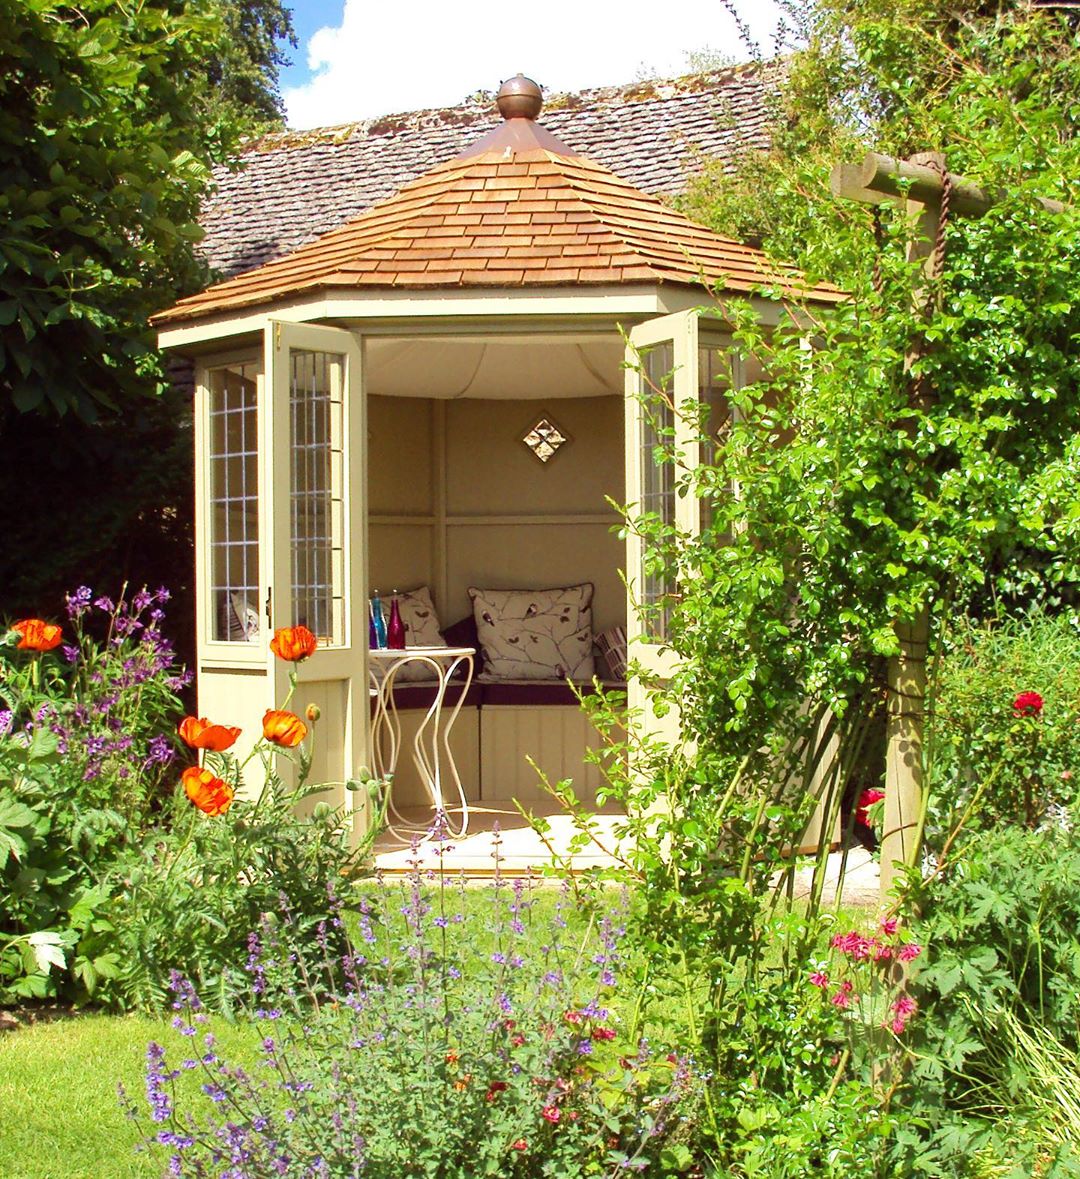 backyard shed with seating space in garden photo by Instagram user @scotts_of_thrapston